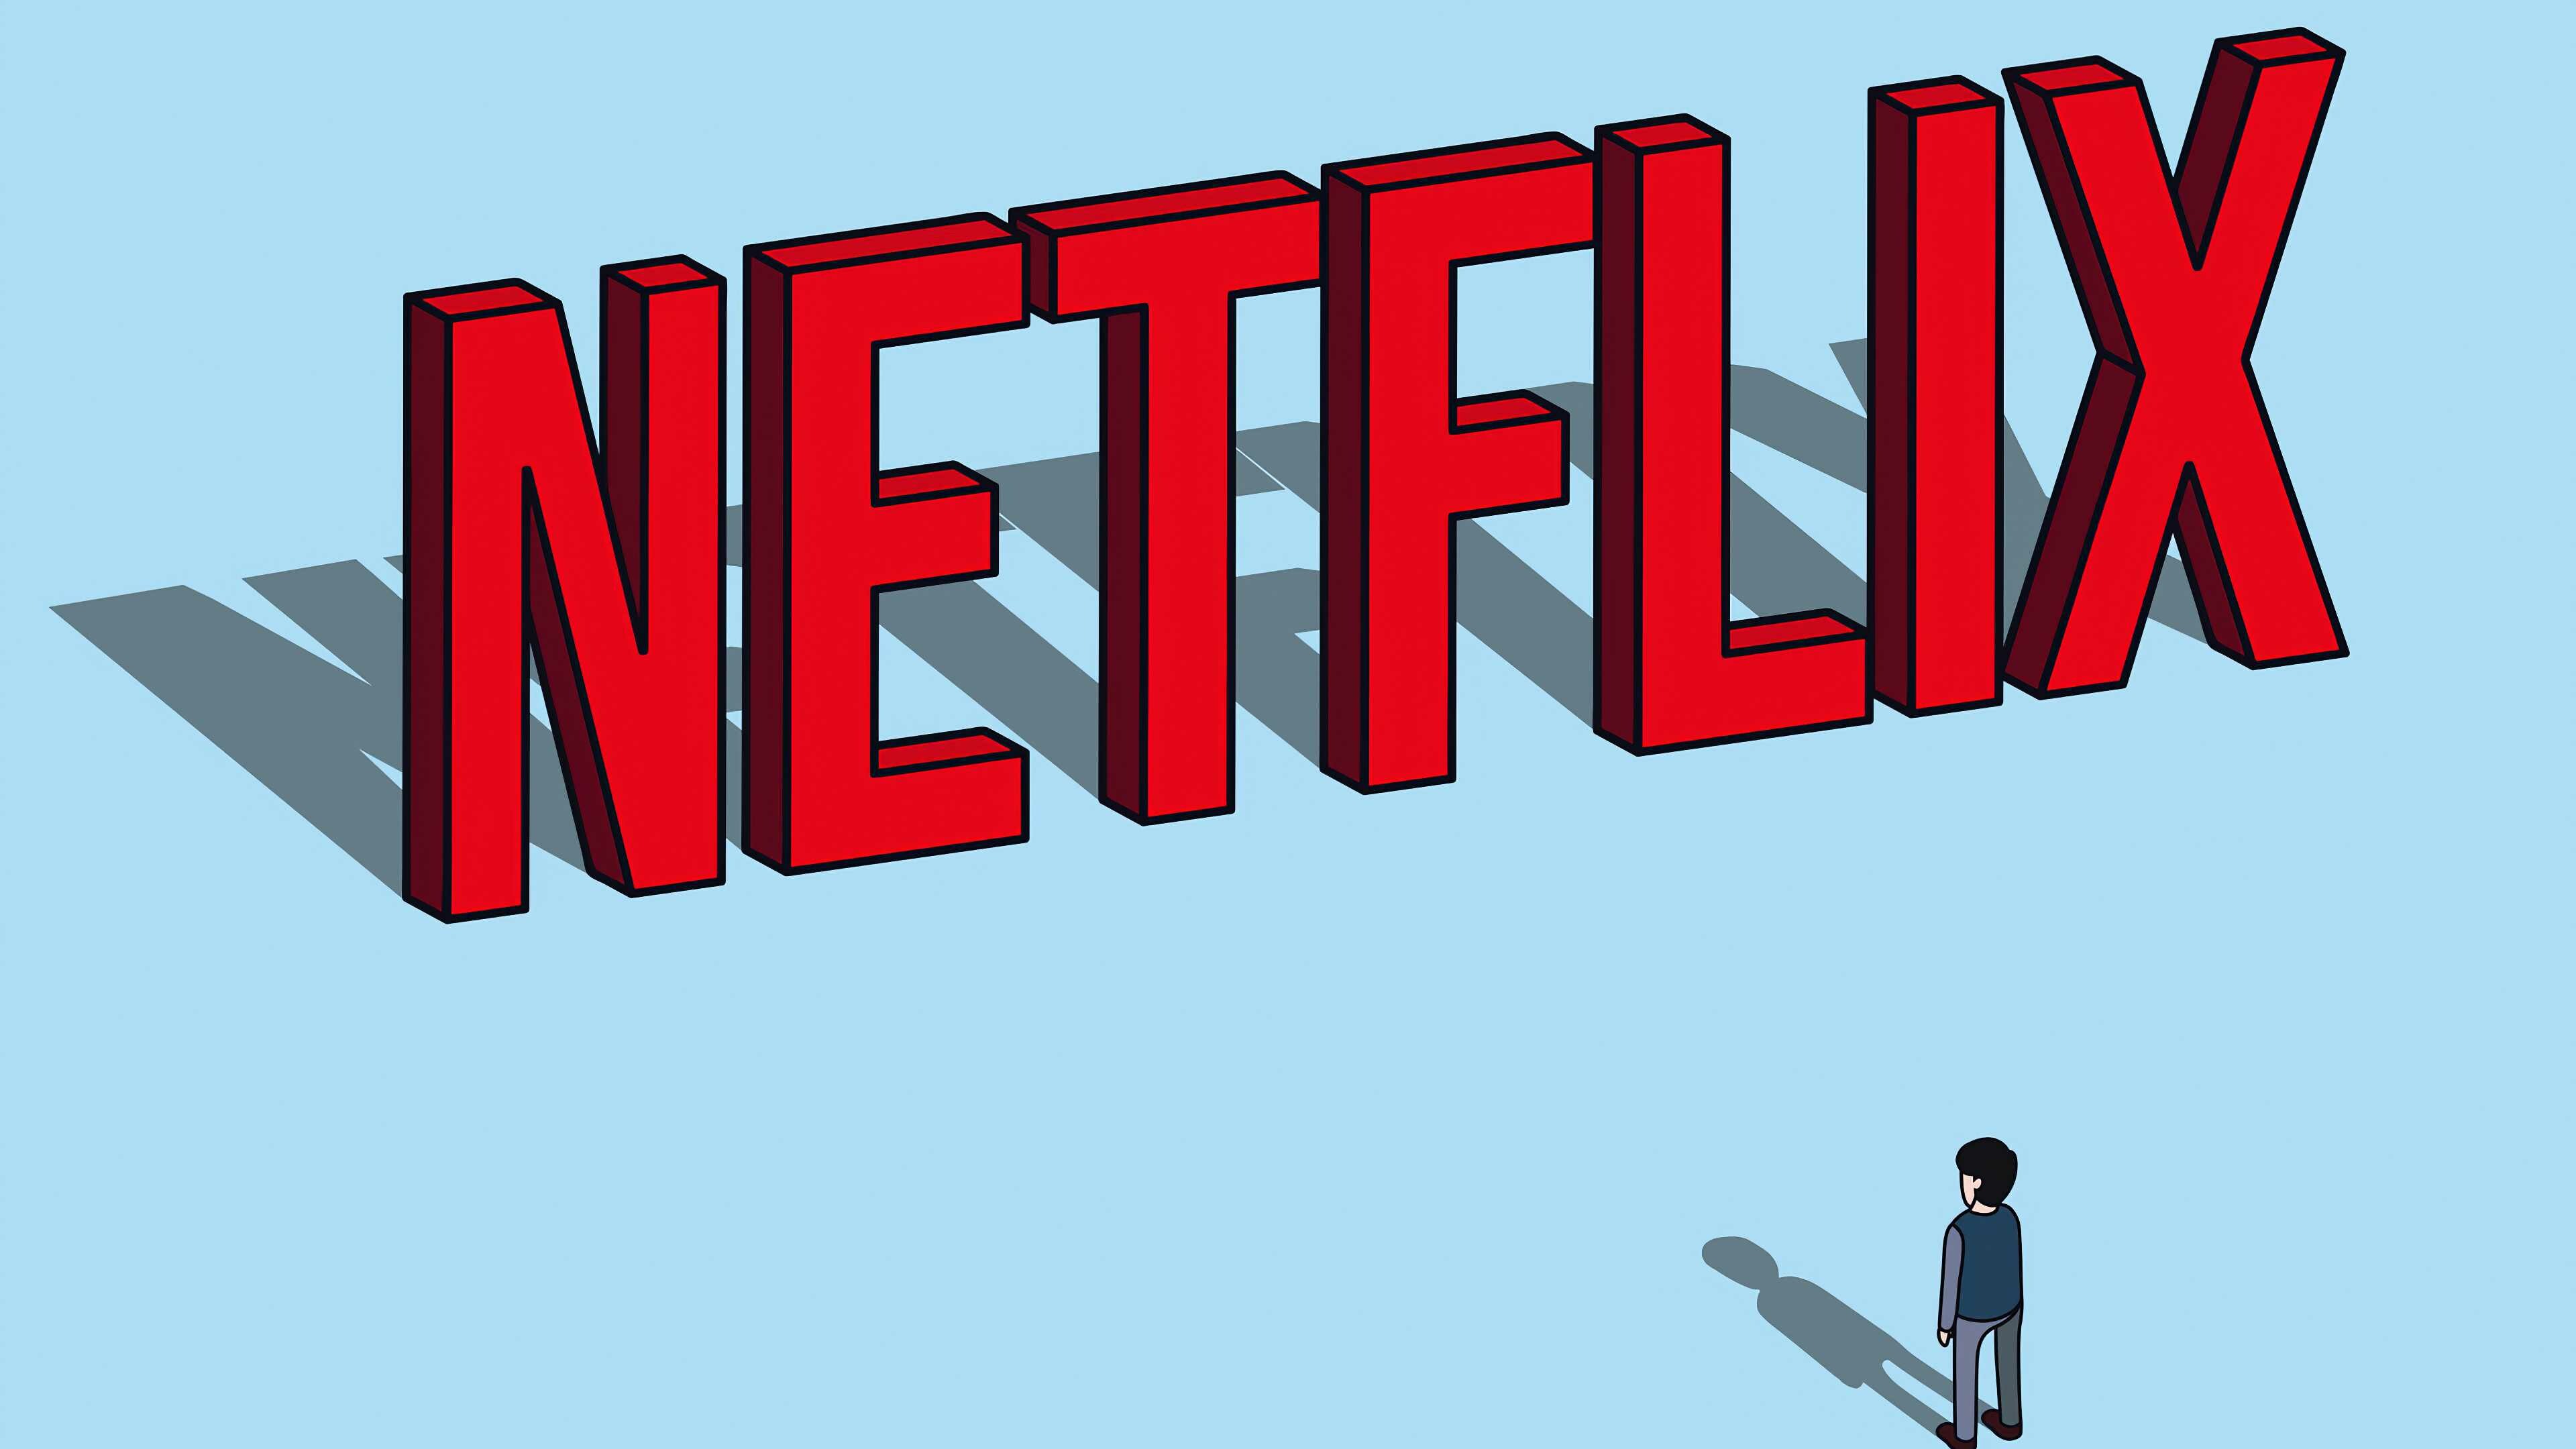 Netflix: A streaming service that offers a wide variety of award-winning TV shows, movies, anime, documentaries. 3840x2160 4K Wallpaper.